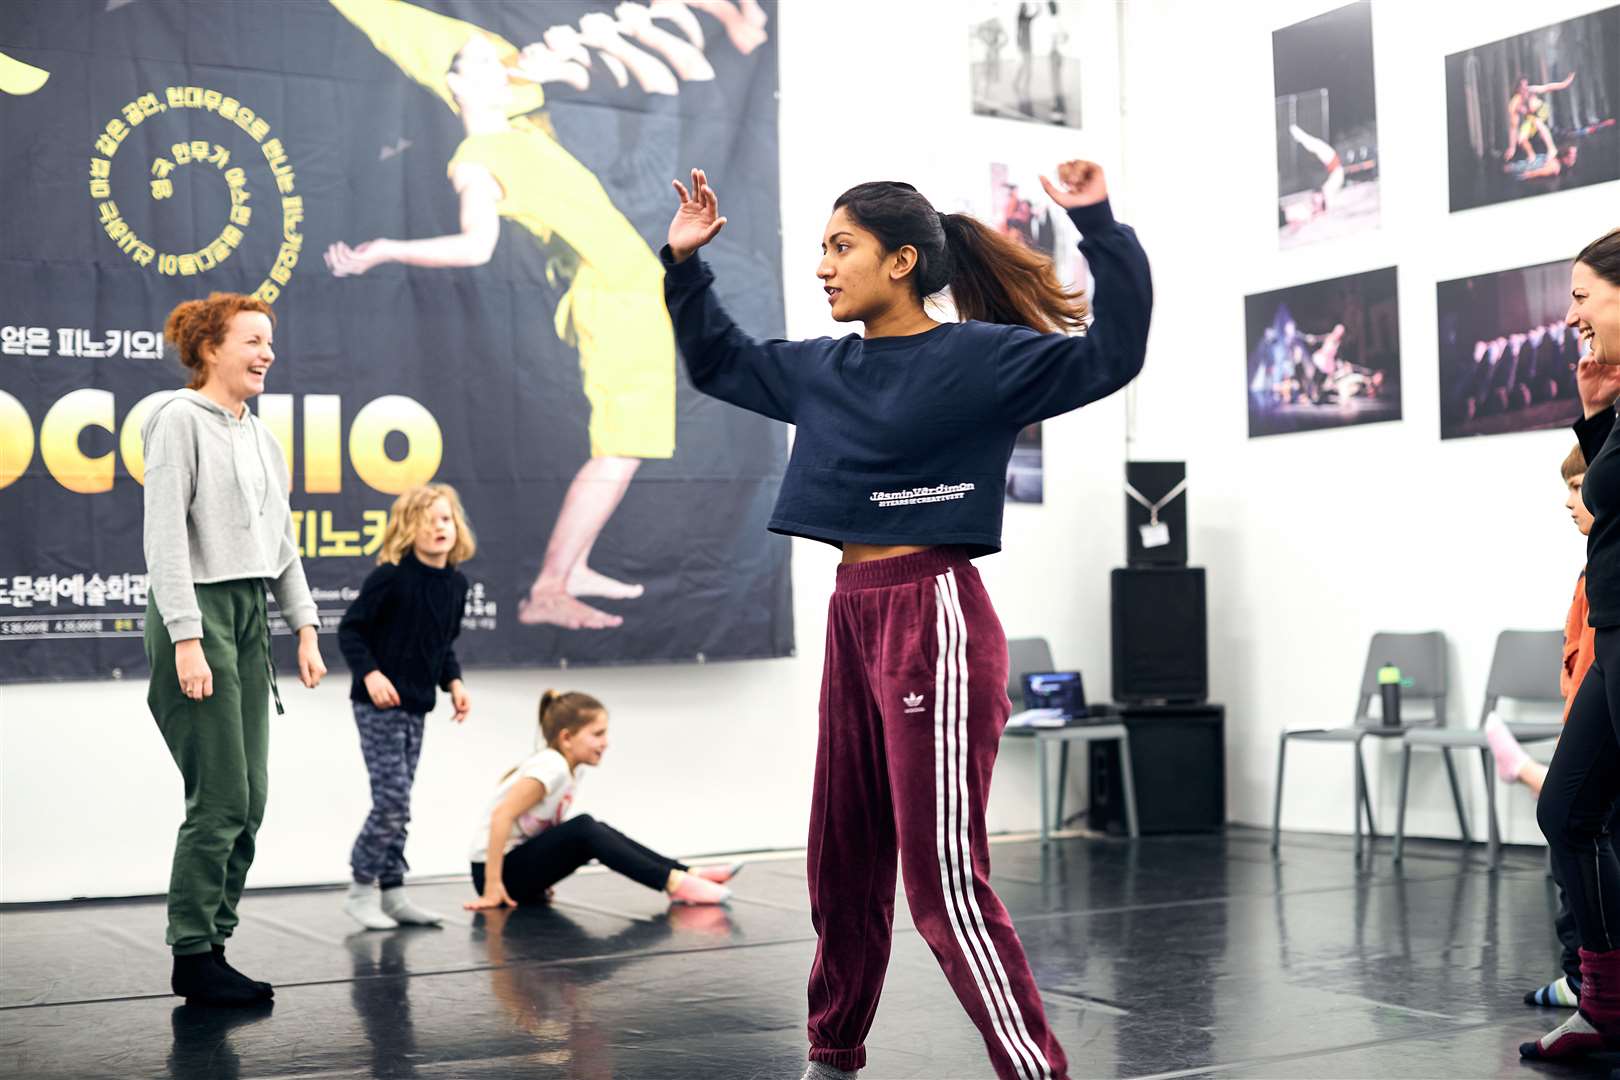 Jasmin Vardimon Dance Company which has been running online classes during the pandemic is to receive £117,500